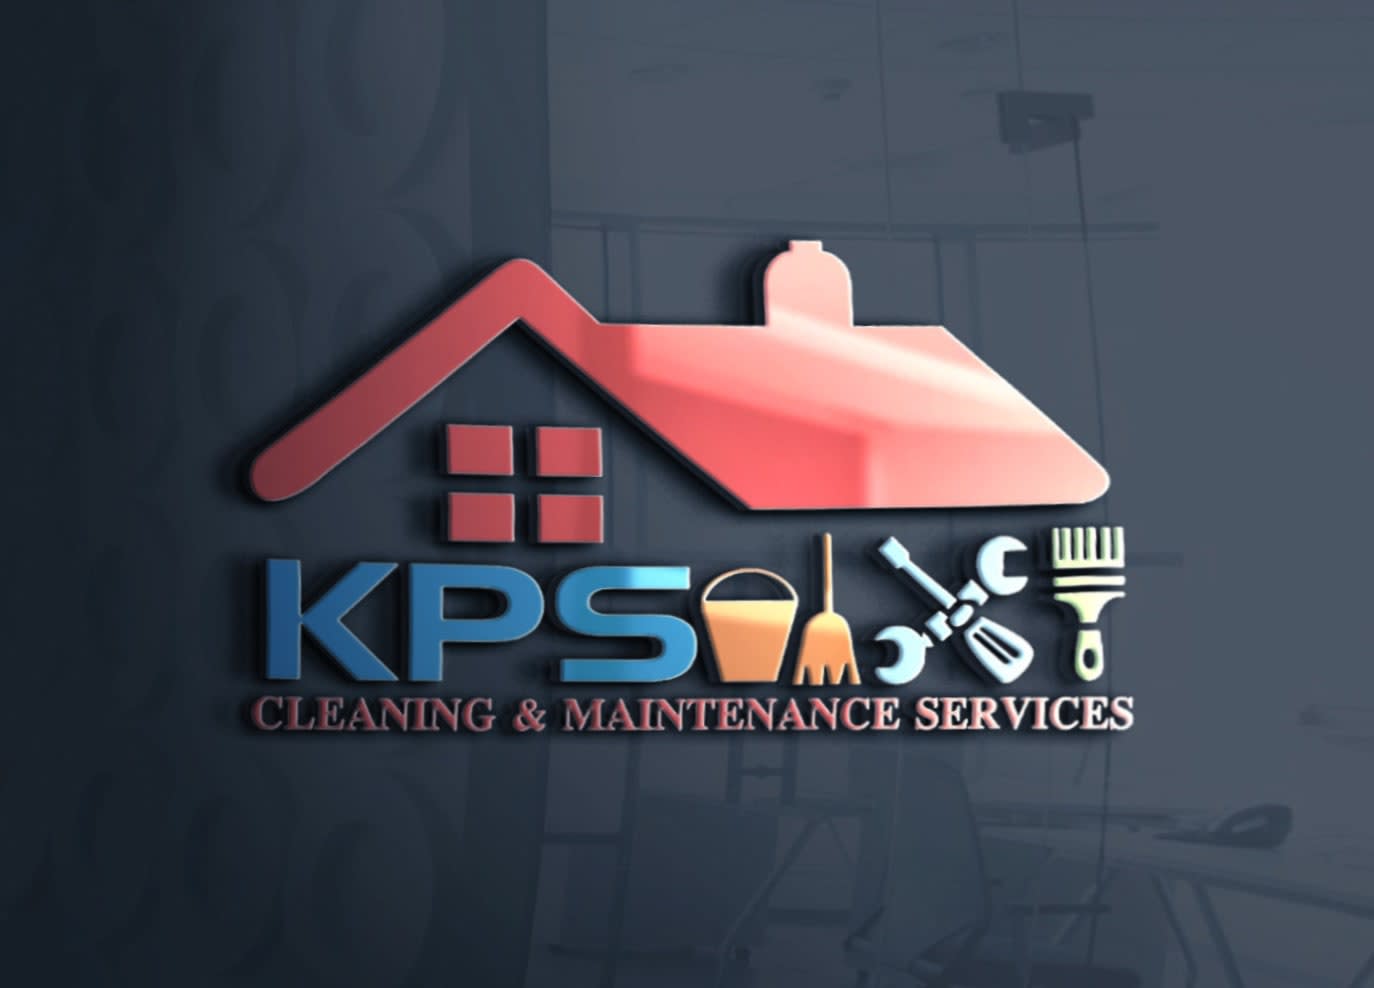 KPS Cleaning & Maintenance Services